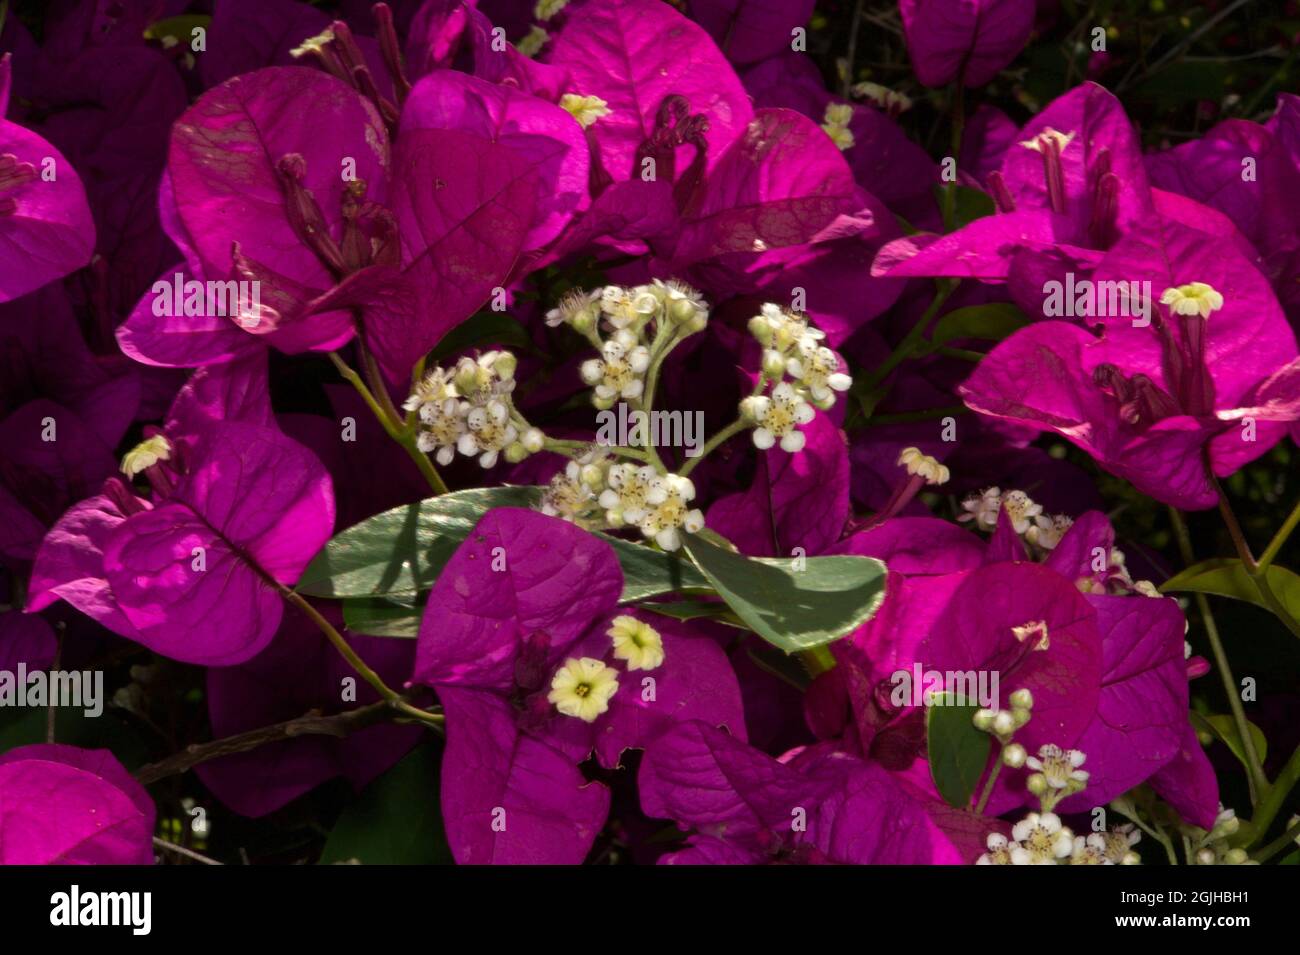 Here is a blend of 2 different flowers - the purple of a Bougainvillea (Bougainvillea Glabra) and a Cotoneaster tree (Cotoneaster Frigidus). Stock Photo